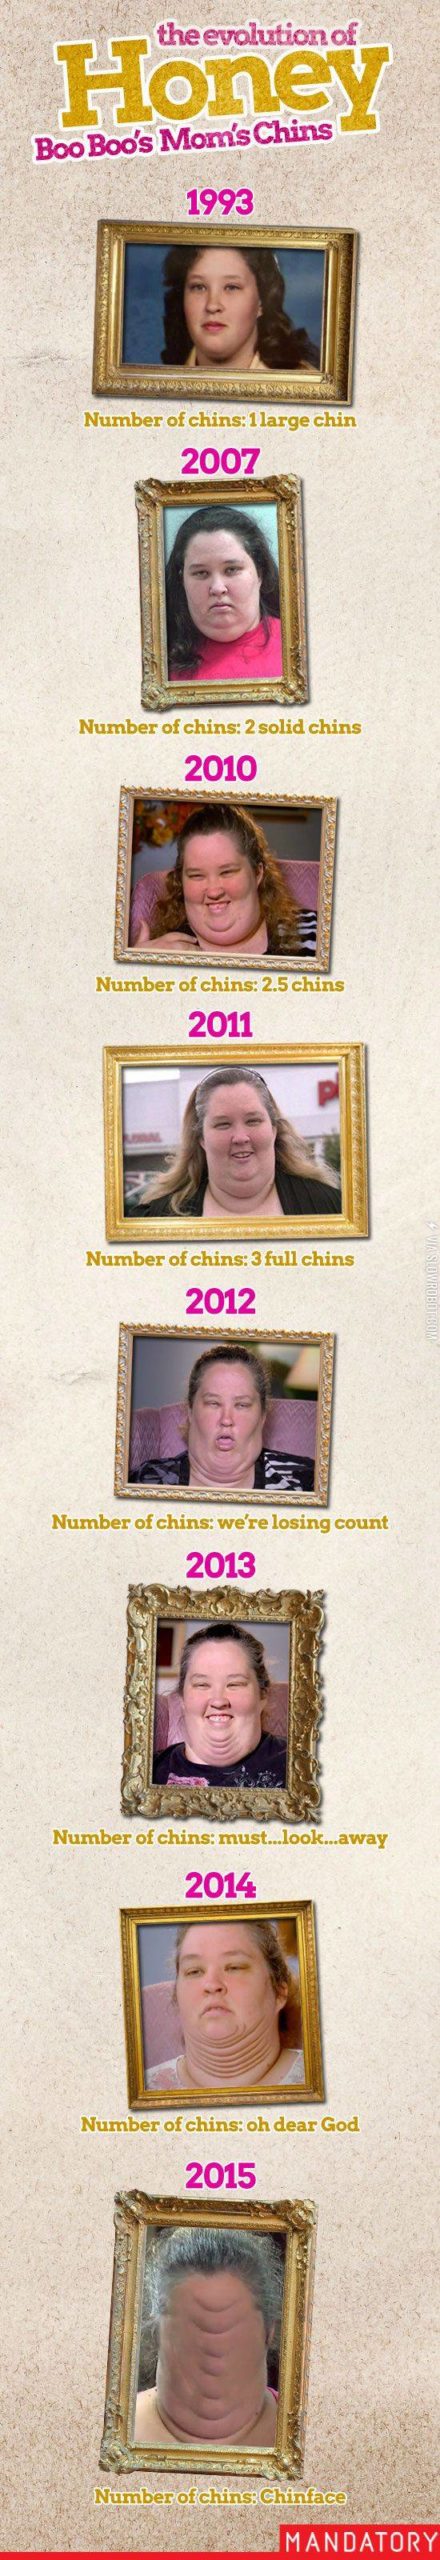 The+evolution+of+chins